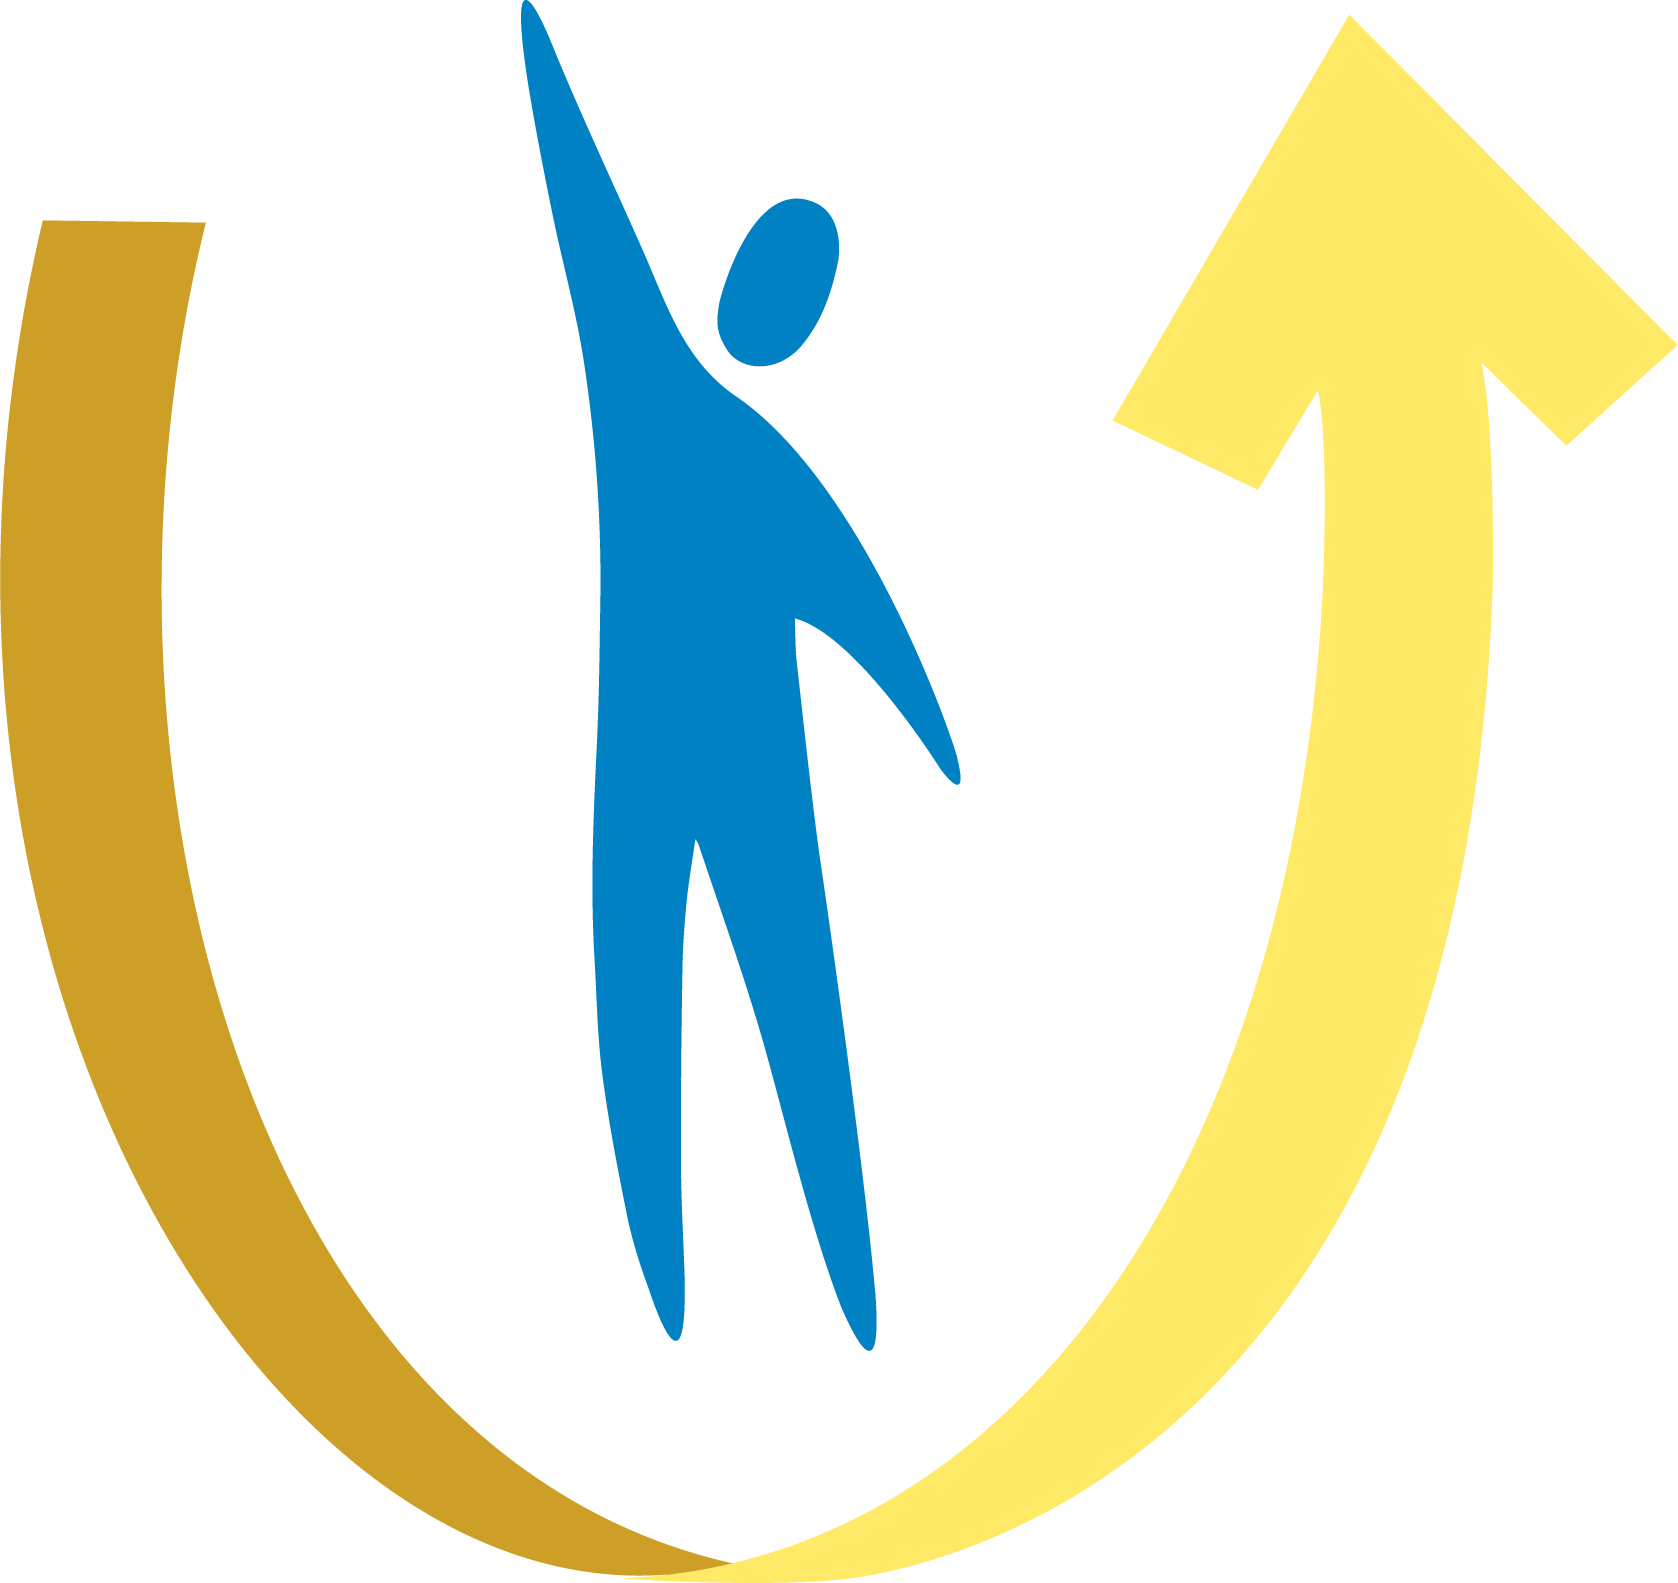 Logo: Illustration of a person with right arm up standing above U shaped arrow